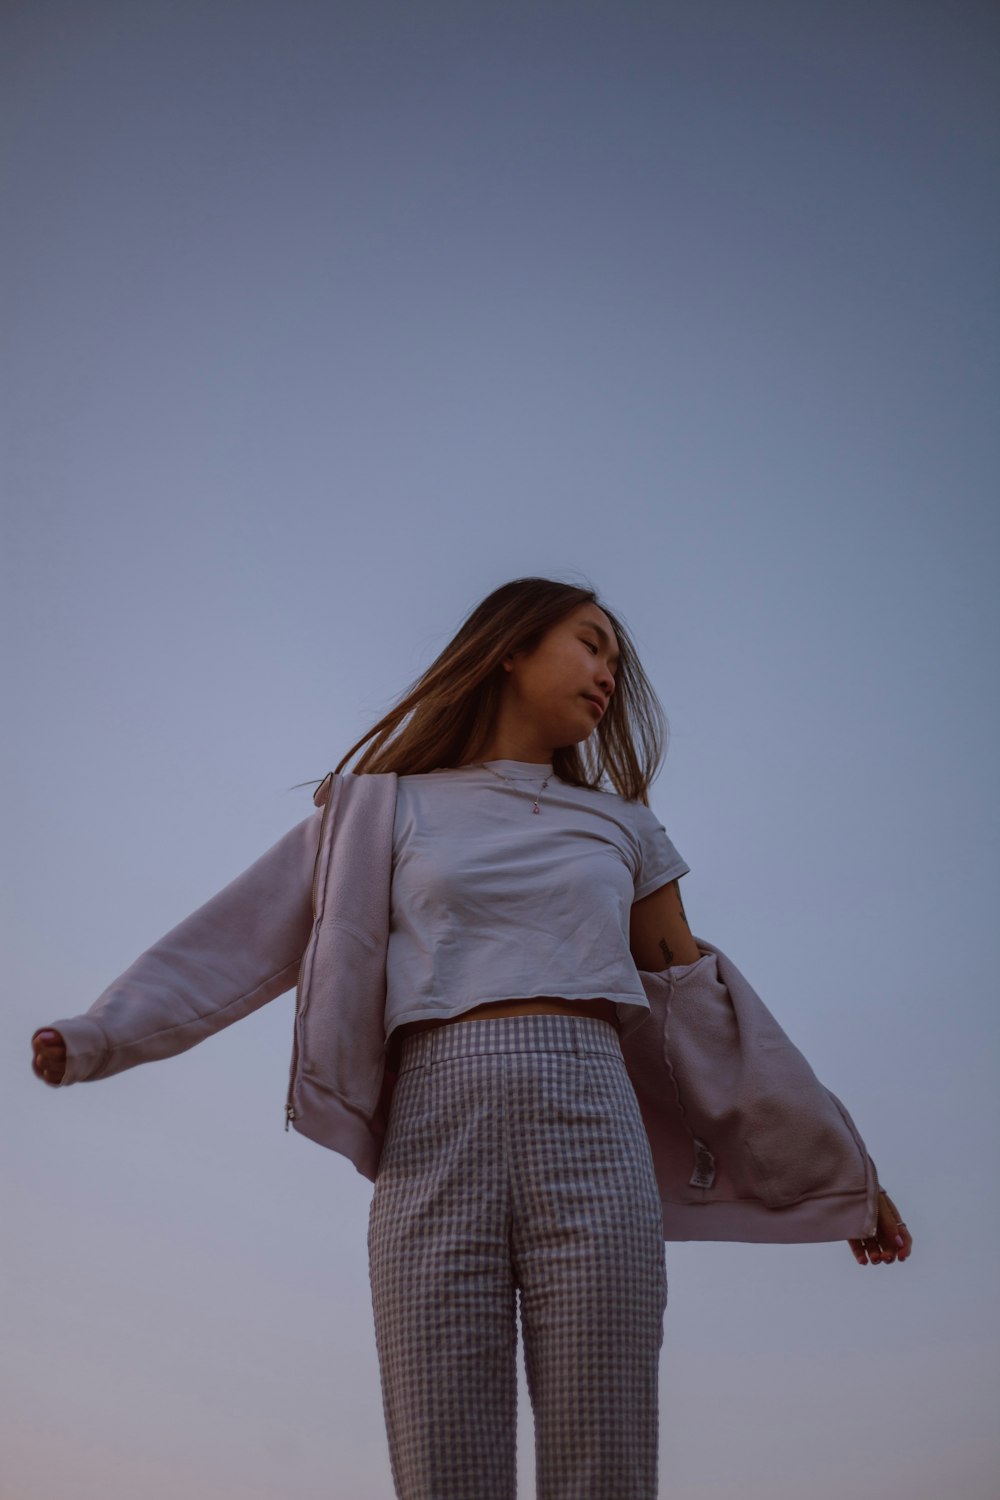 woman in white long sleeve shirt and brown and white plaid skirt